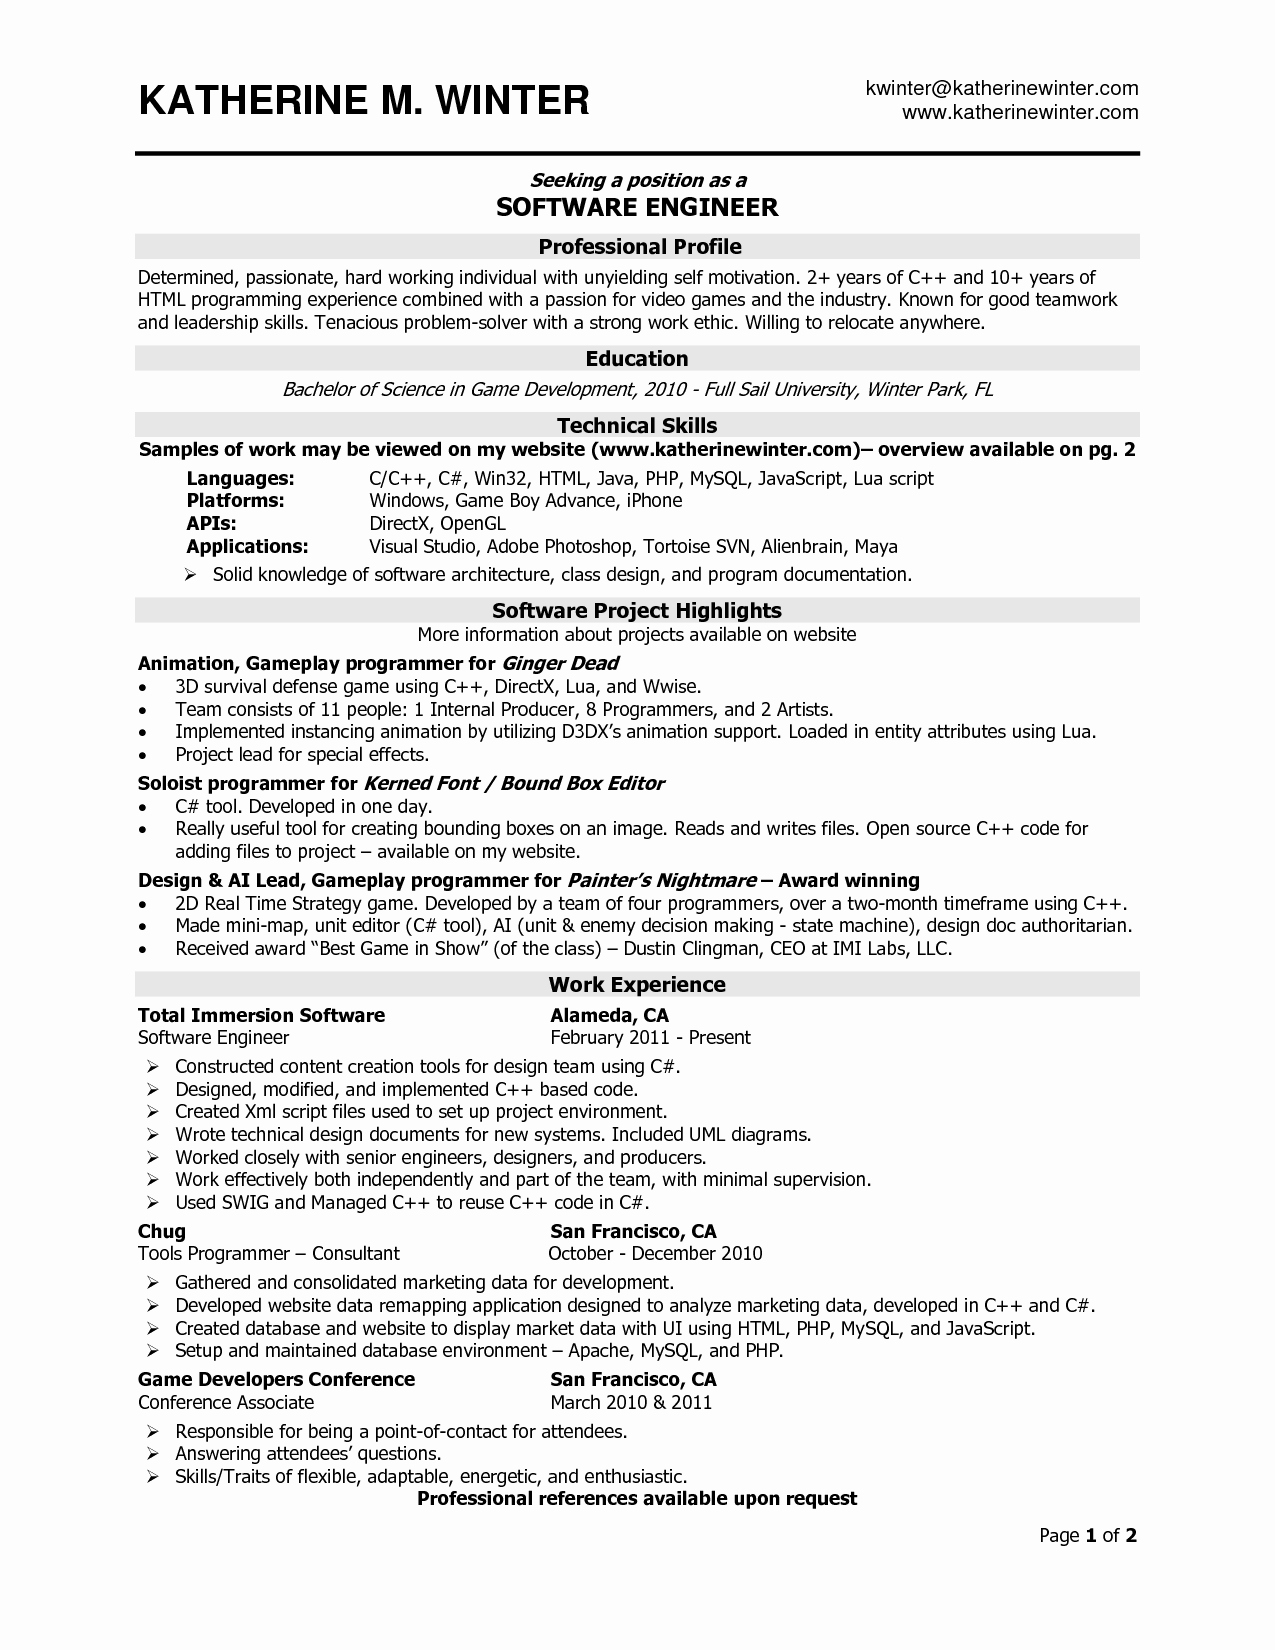 Medical Scribe Cover Letter No Experience New Mainframe Developer Resume Examples Resume Ideas